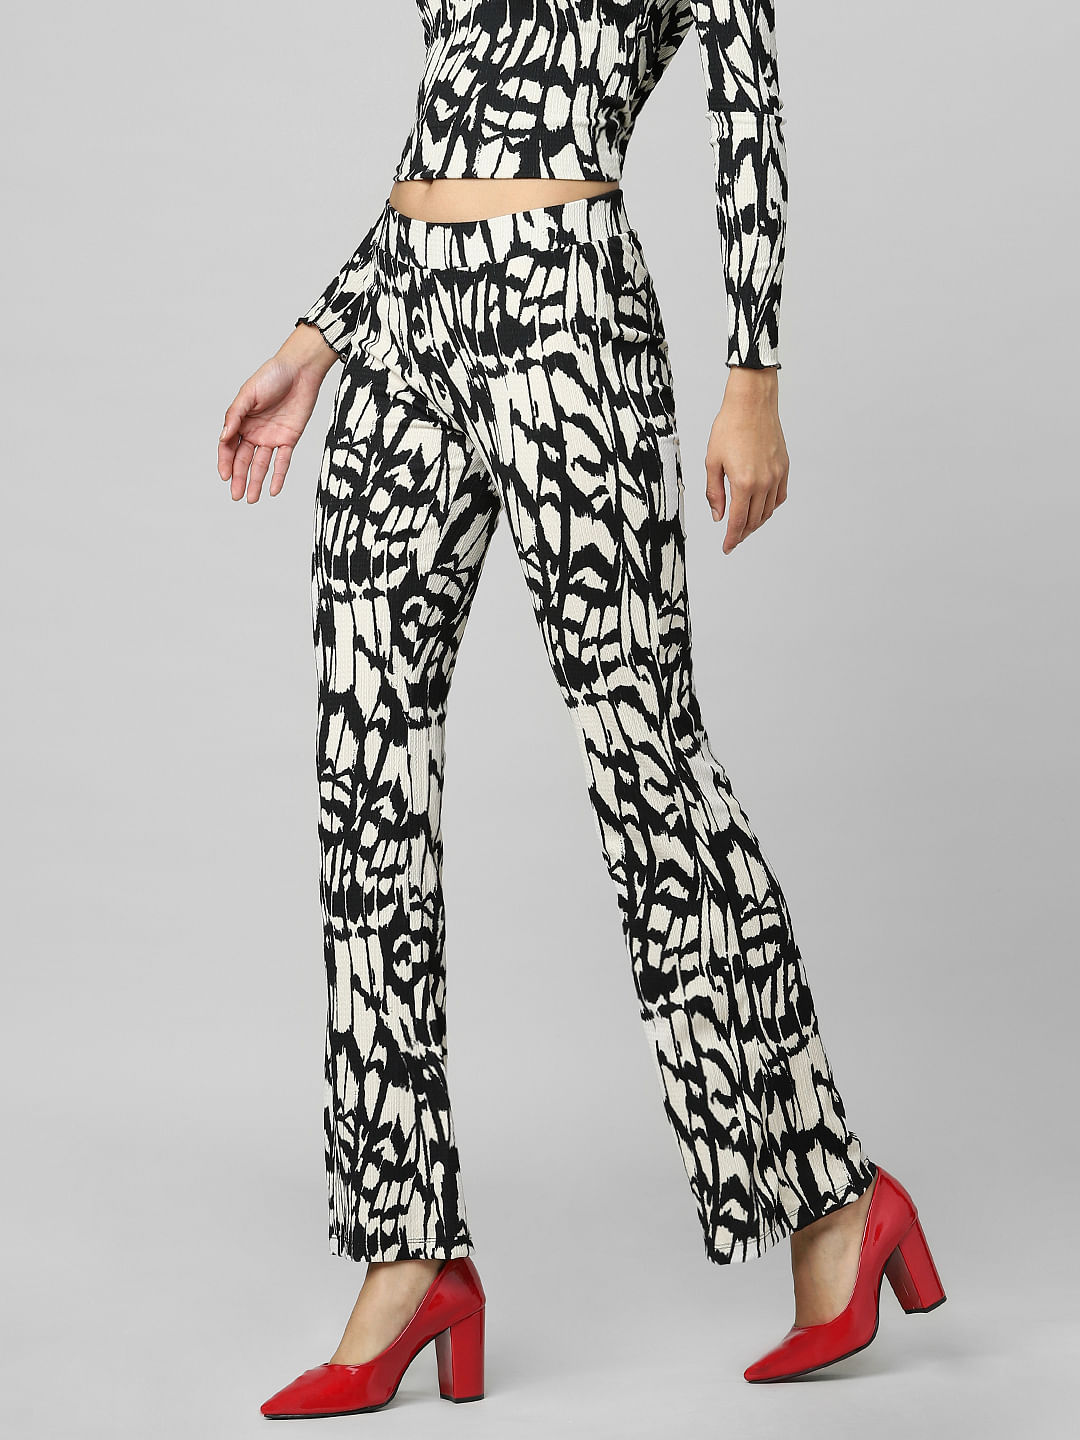 7 Street Style Ways to Wear Printed Pants This Fall 